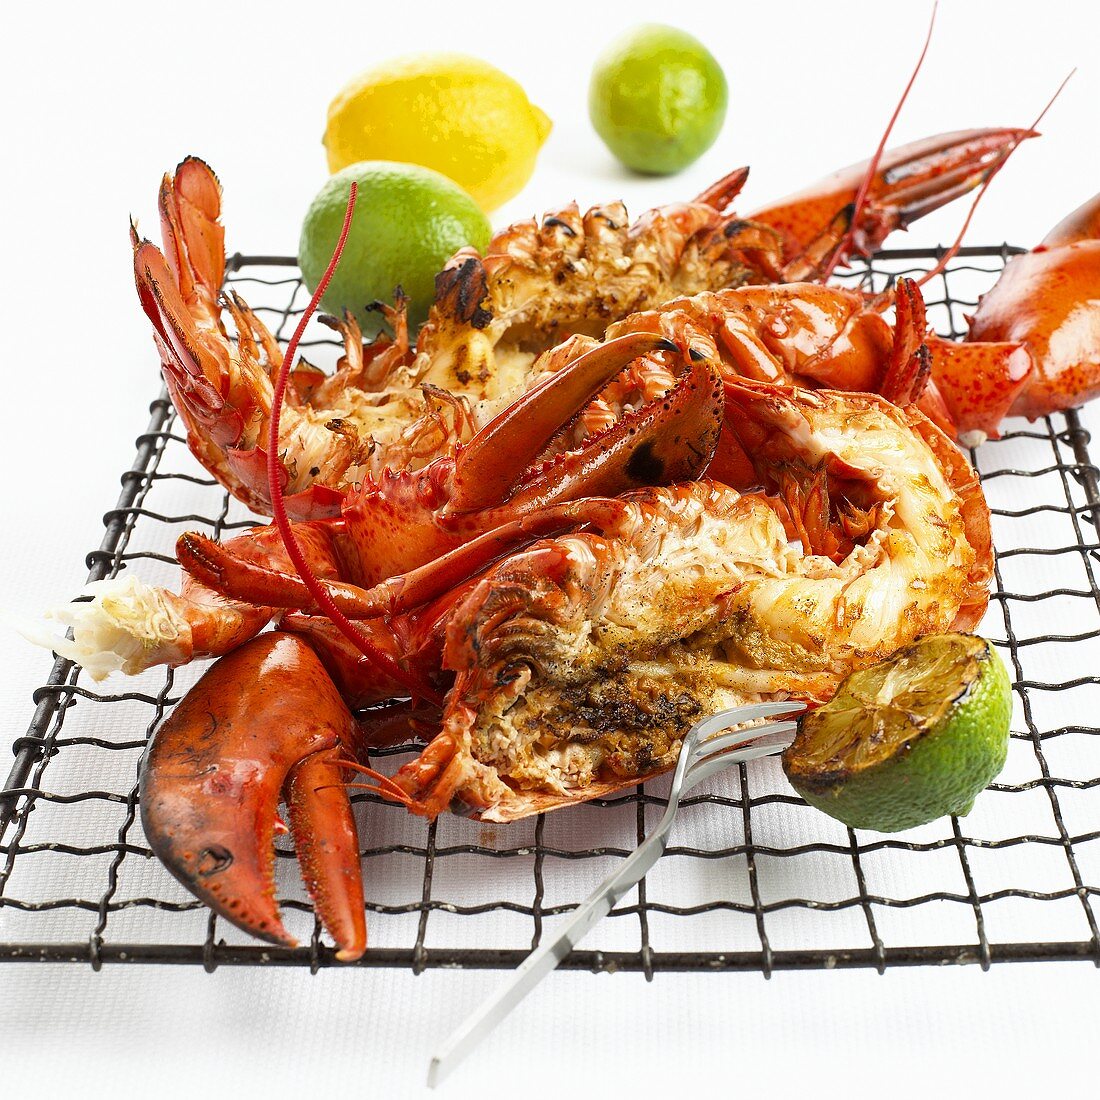 Barbecued lobster on a grill rack